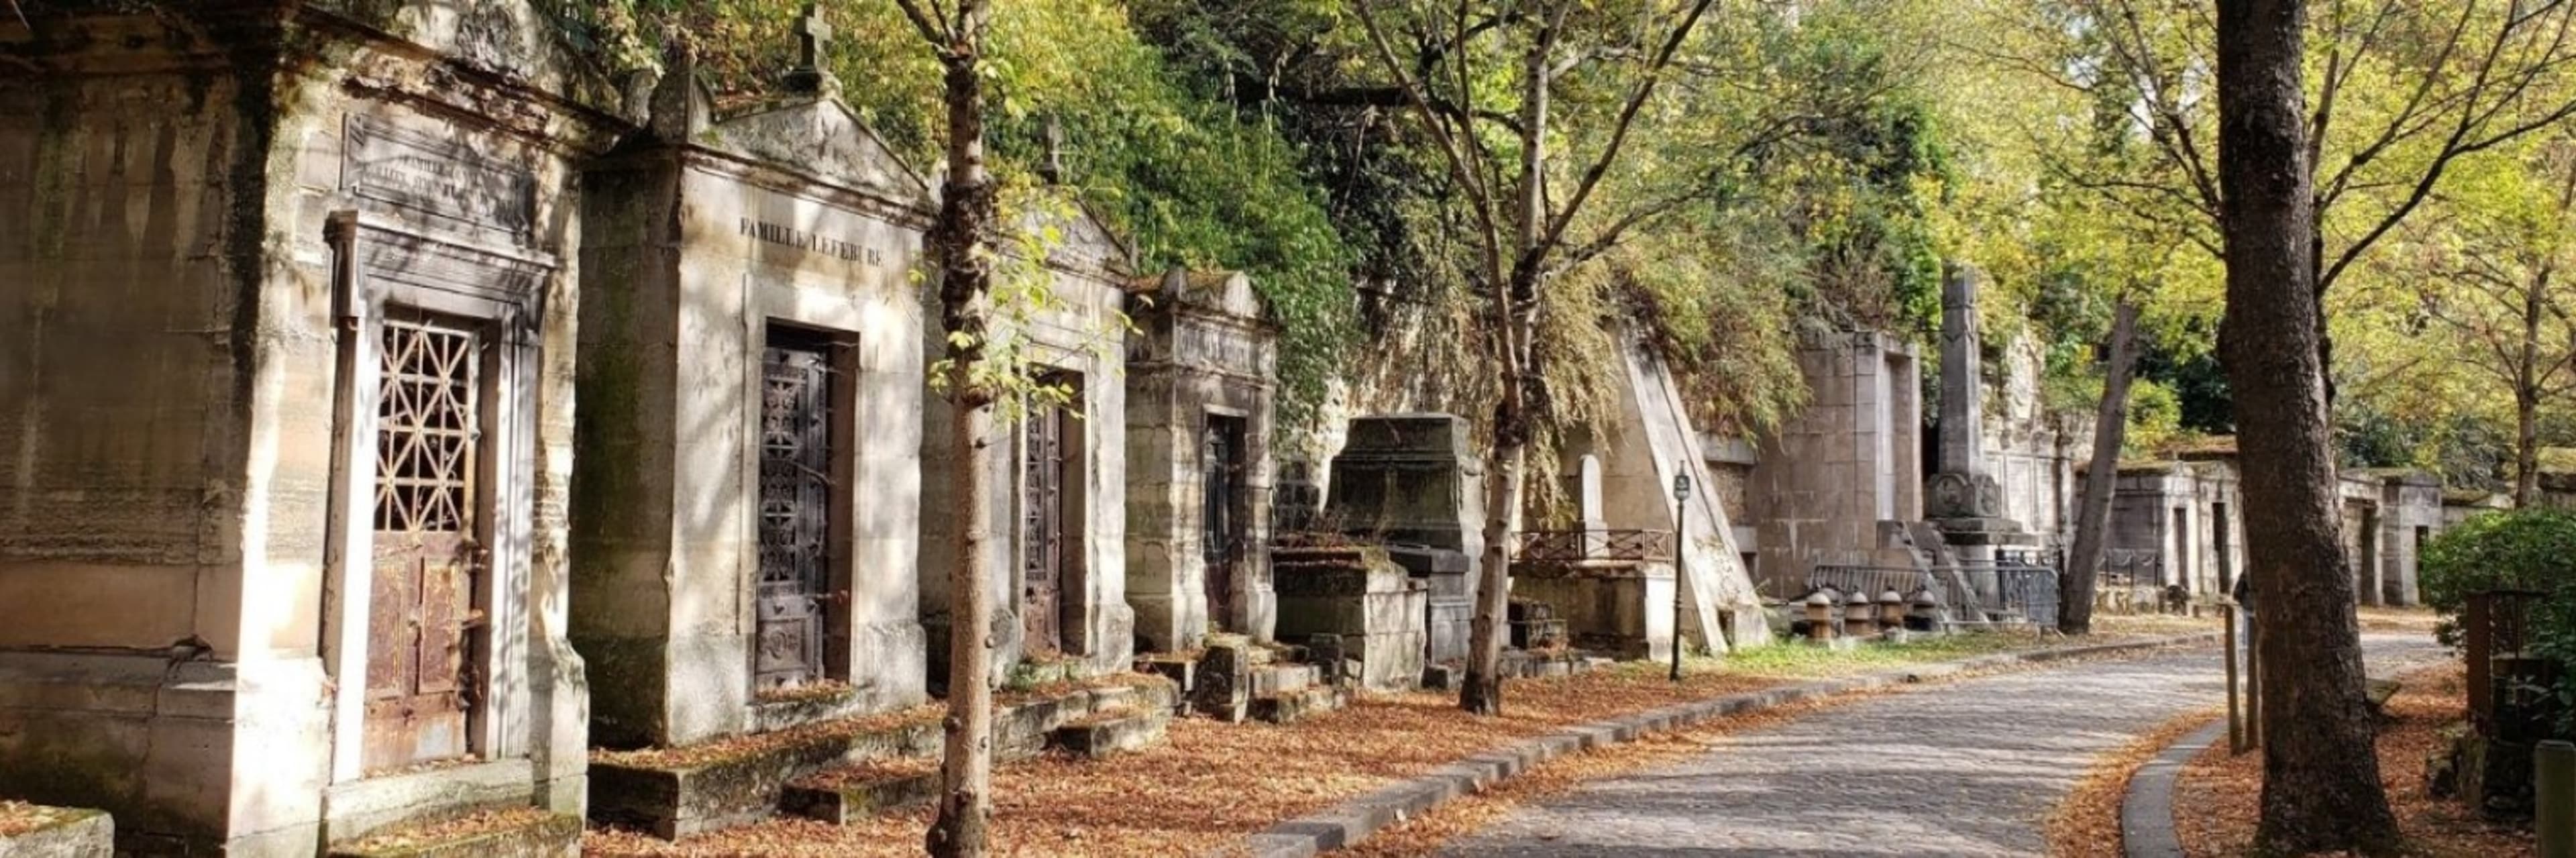 Scandals & Love Affairs at Pere Lachaise - Walking Tour